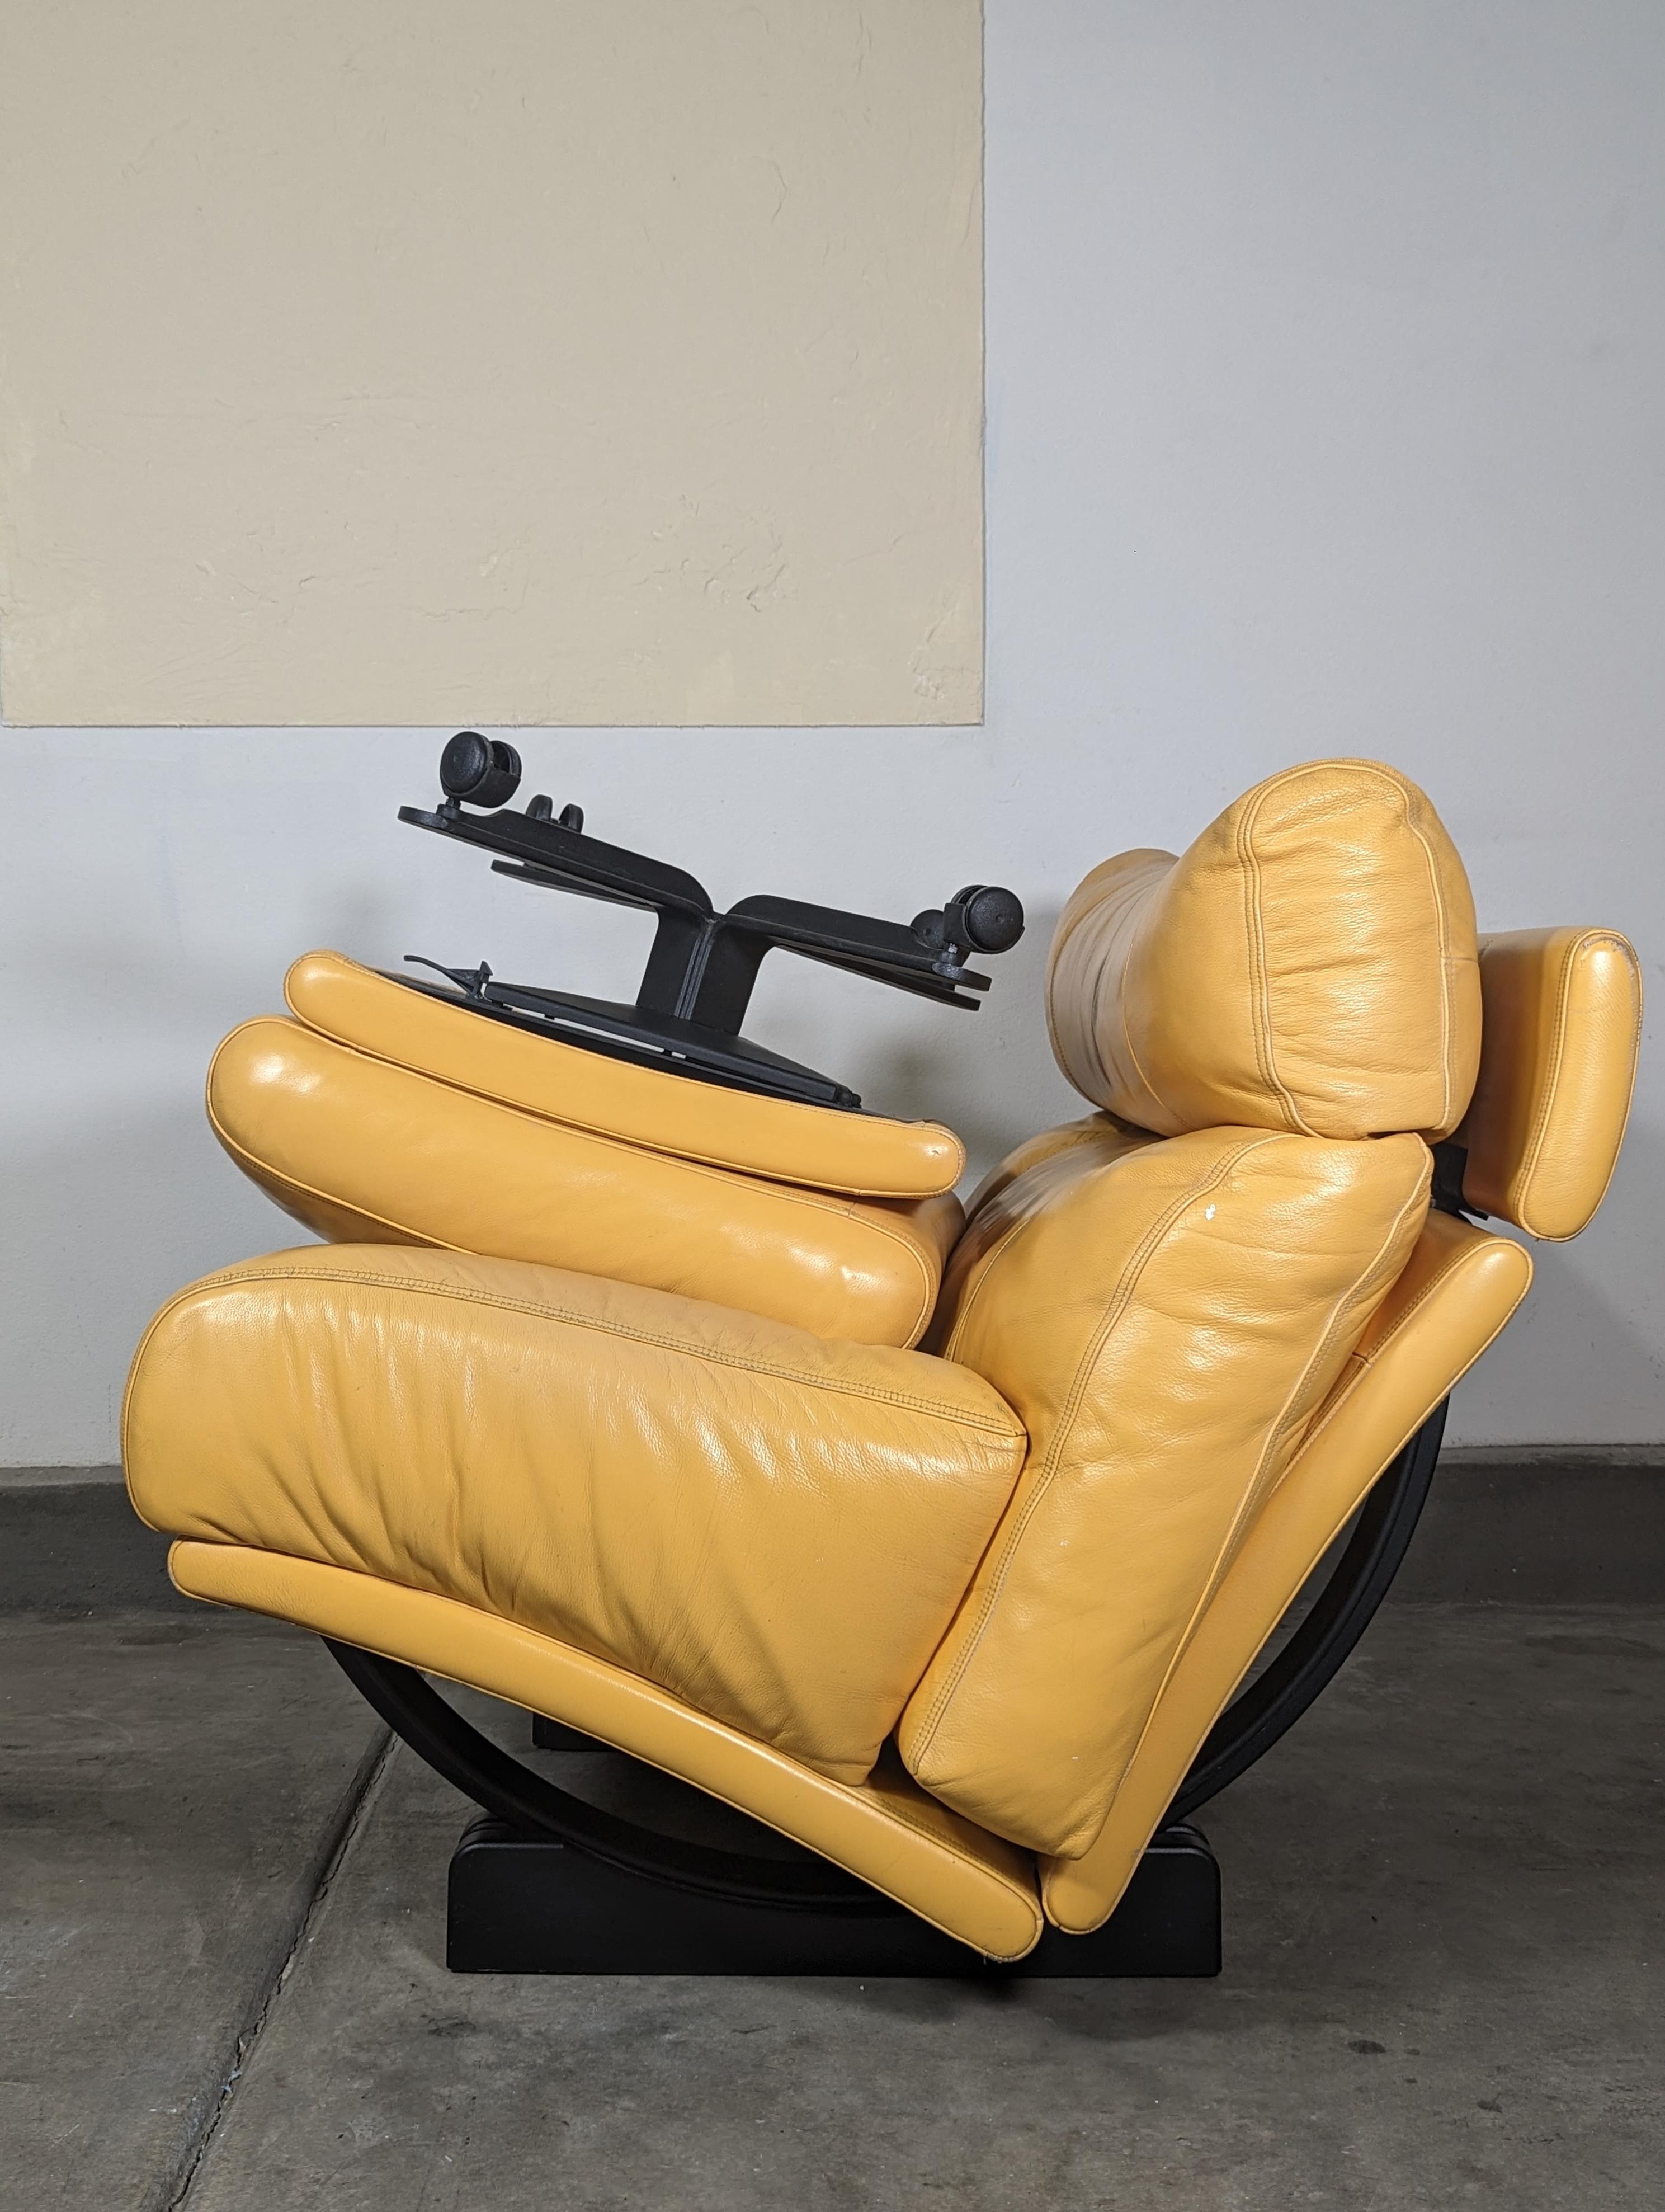 Postmodern Walse Leather Lounge Chair by Tito Agnoli for Poltrona Frau, c1990s For Sale 3